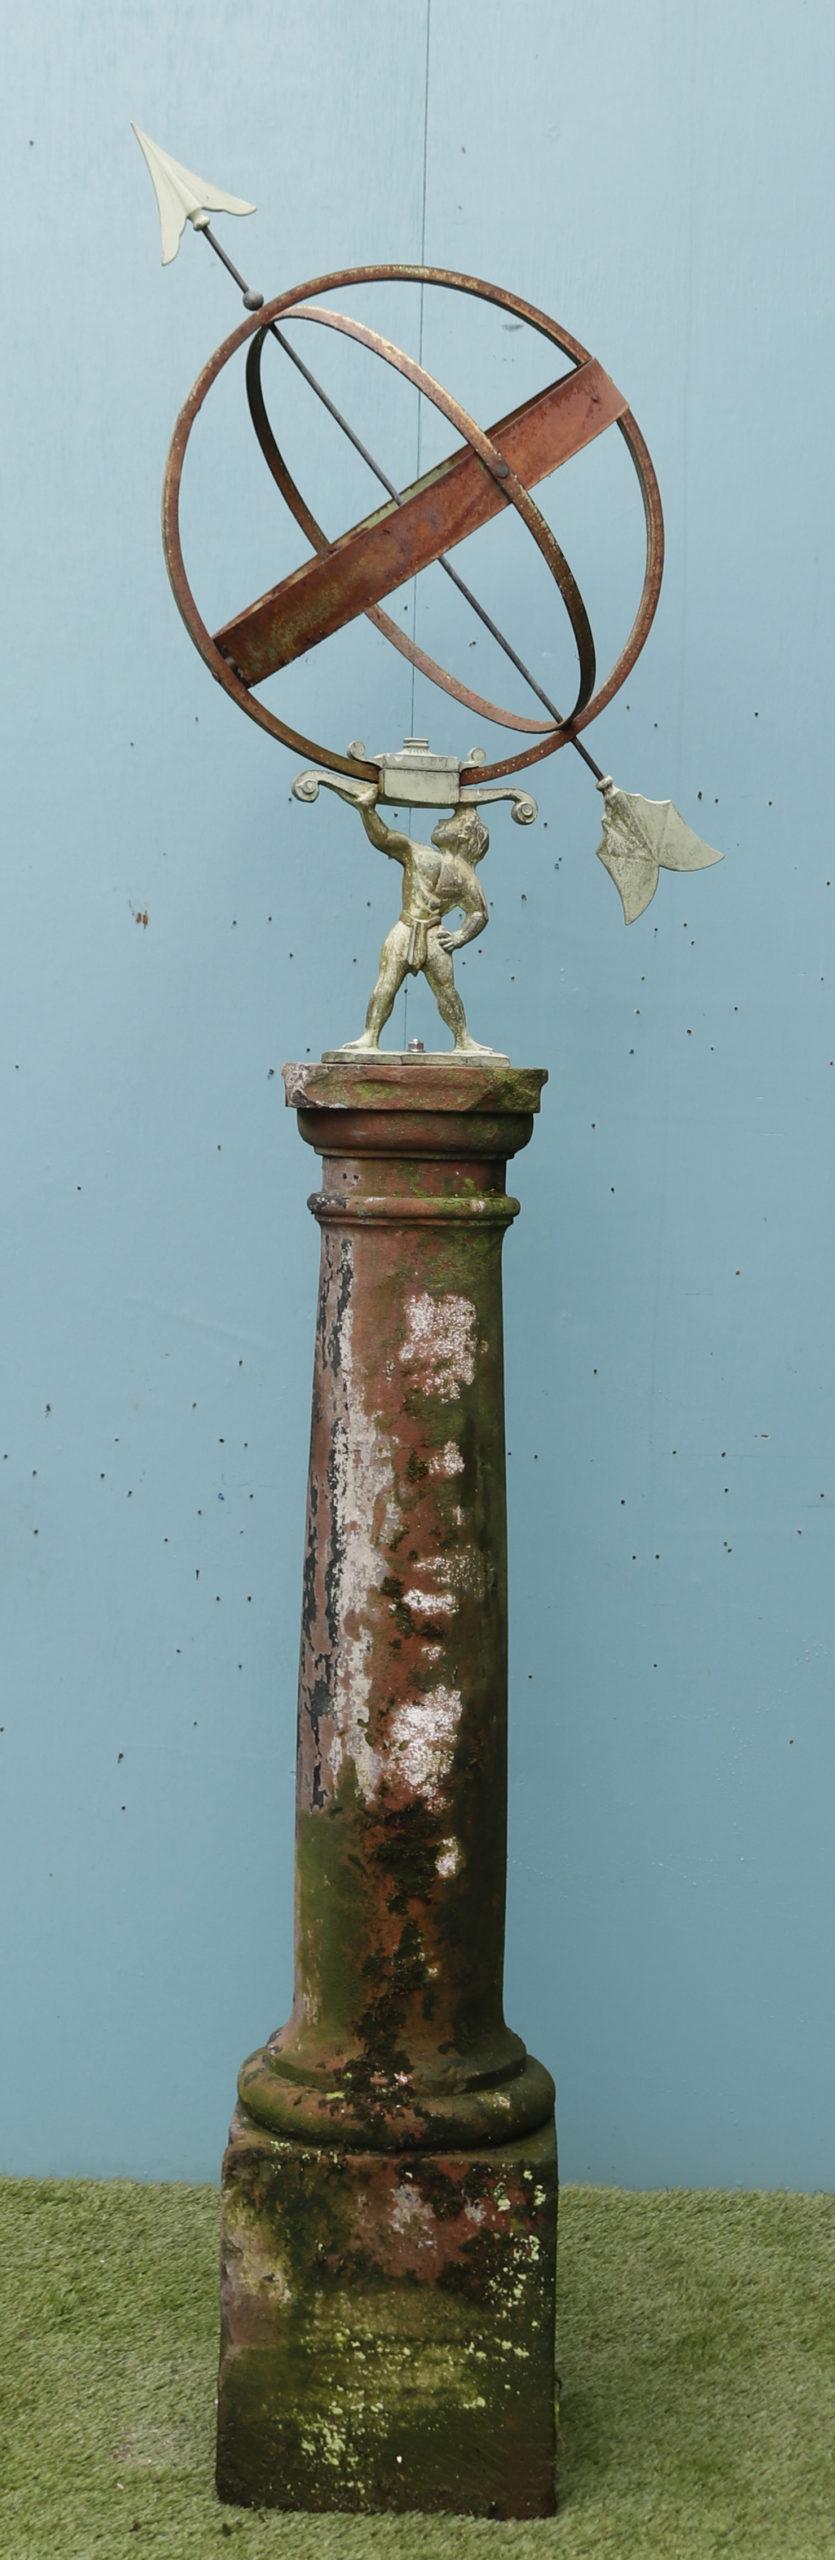 A Georgian style garden sundial. The 20th century armillary sphere mounted upon a Georgian red sandstone column plinth.

Additional Dimensions:

Overall height 193 cm

Height of the stone base 115 cm

Base 27 x 27 cm

Diameter of ring 44 cm